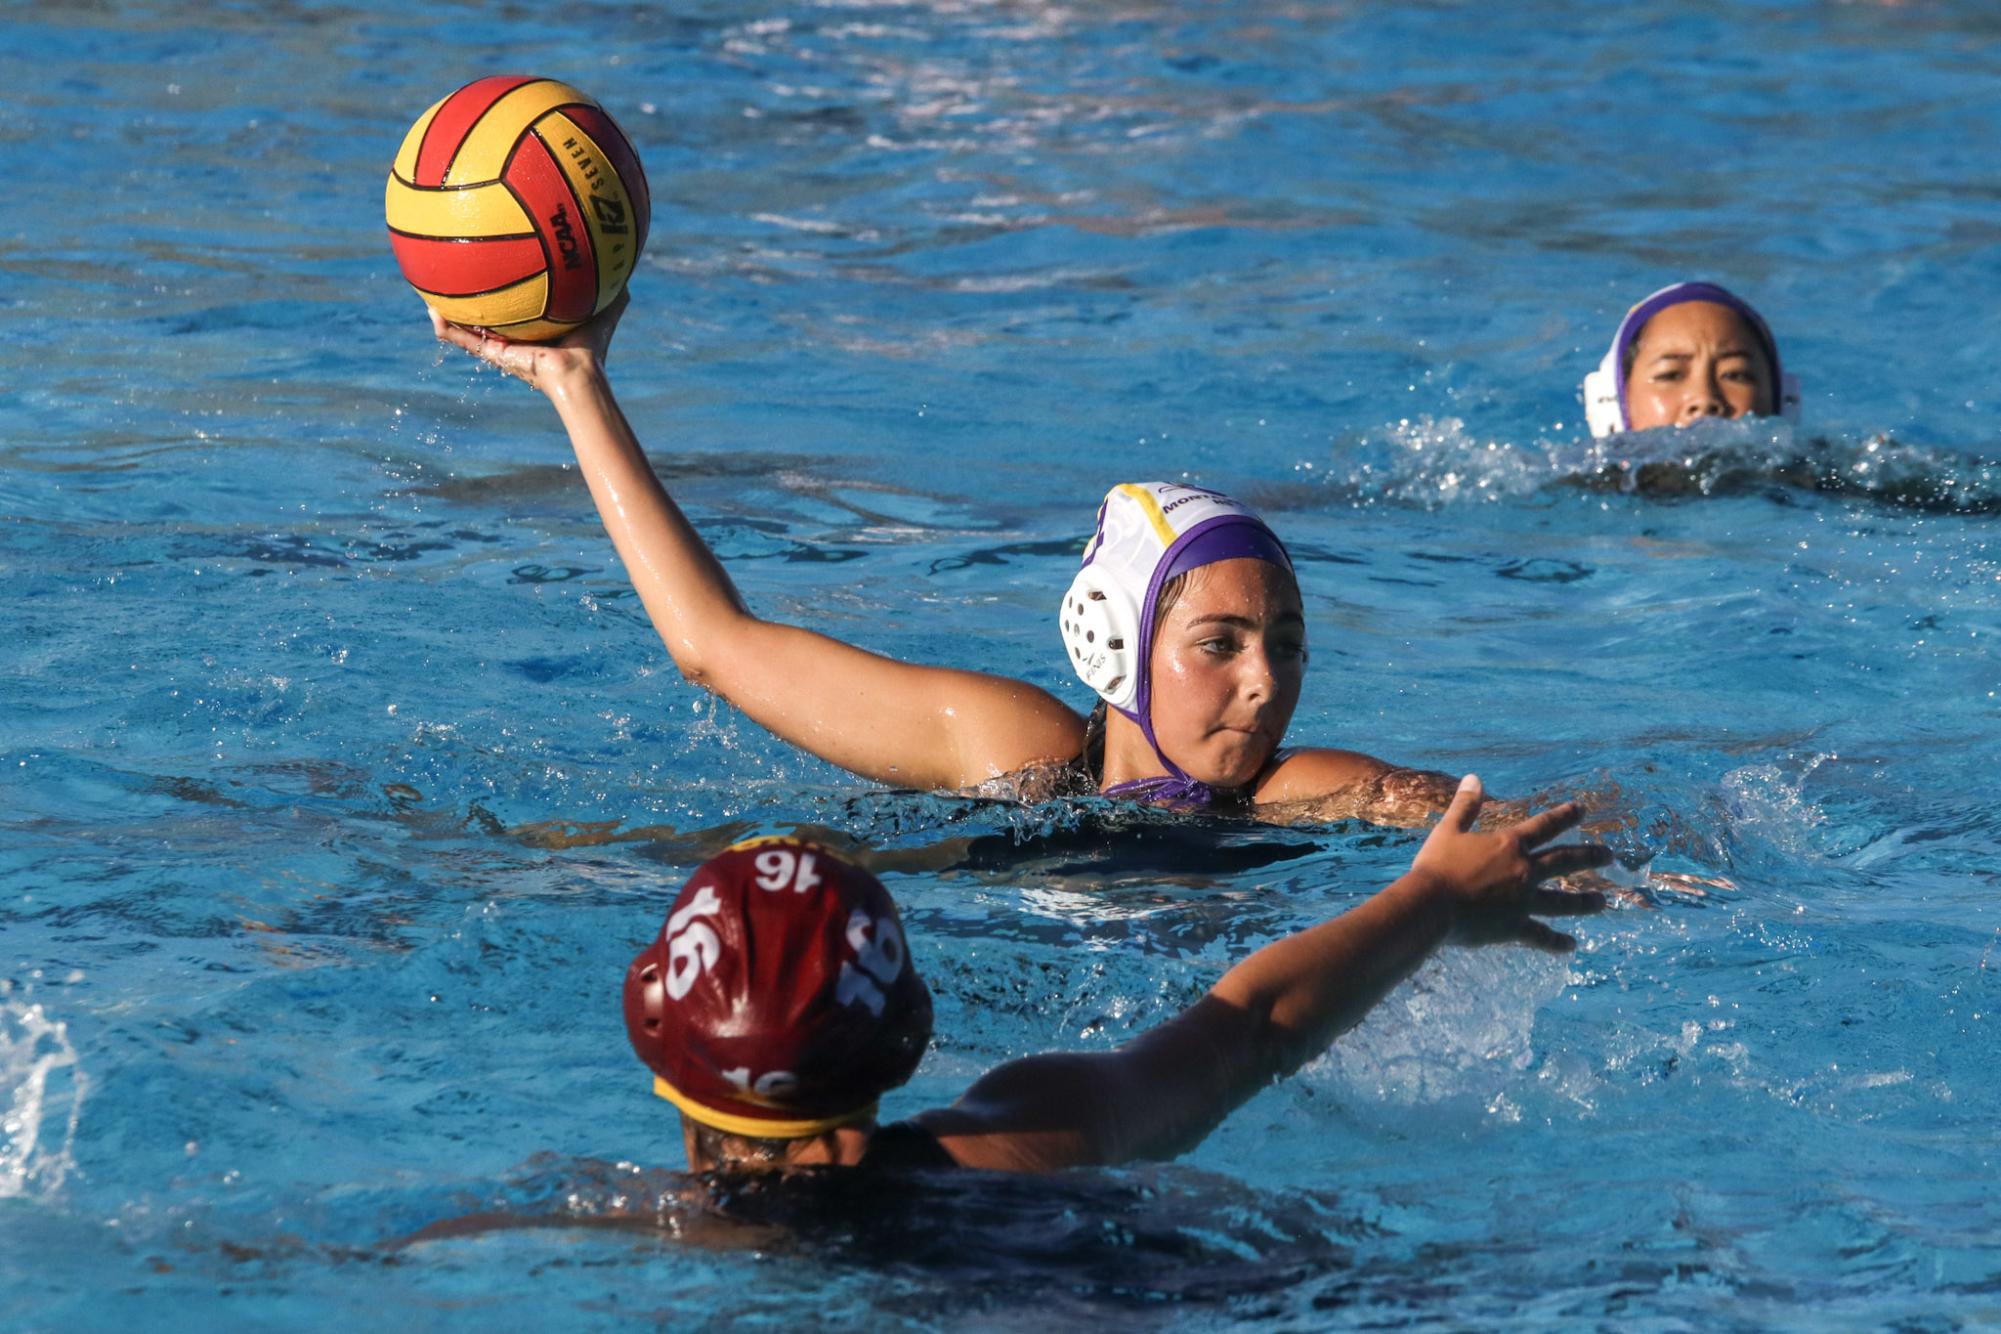 Junior Sonika Wagner aims to score a goal while a CHS player attempts to block the shot. Photo by Arushi Singh

